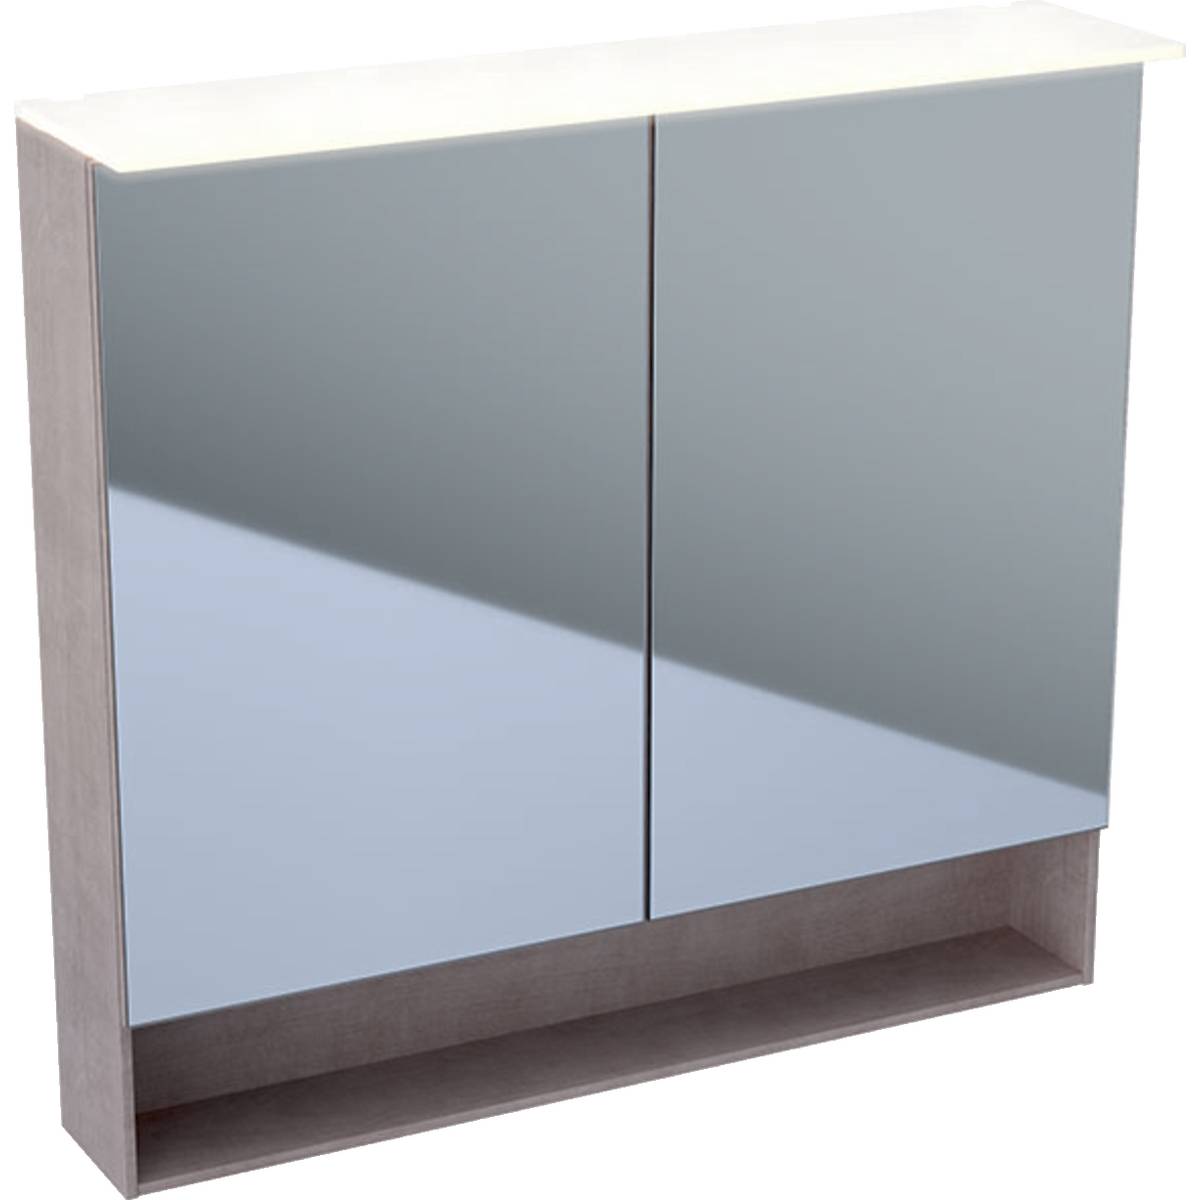 Acanto Mirror Cabinet with Lighting and Two Doors